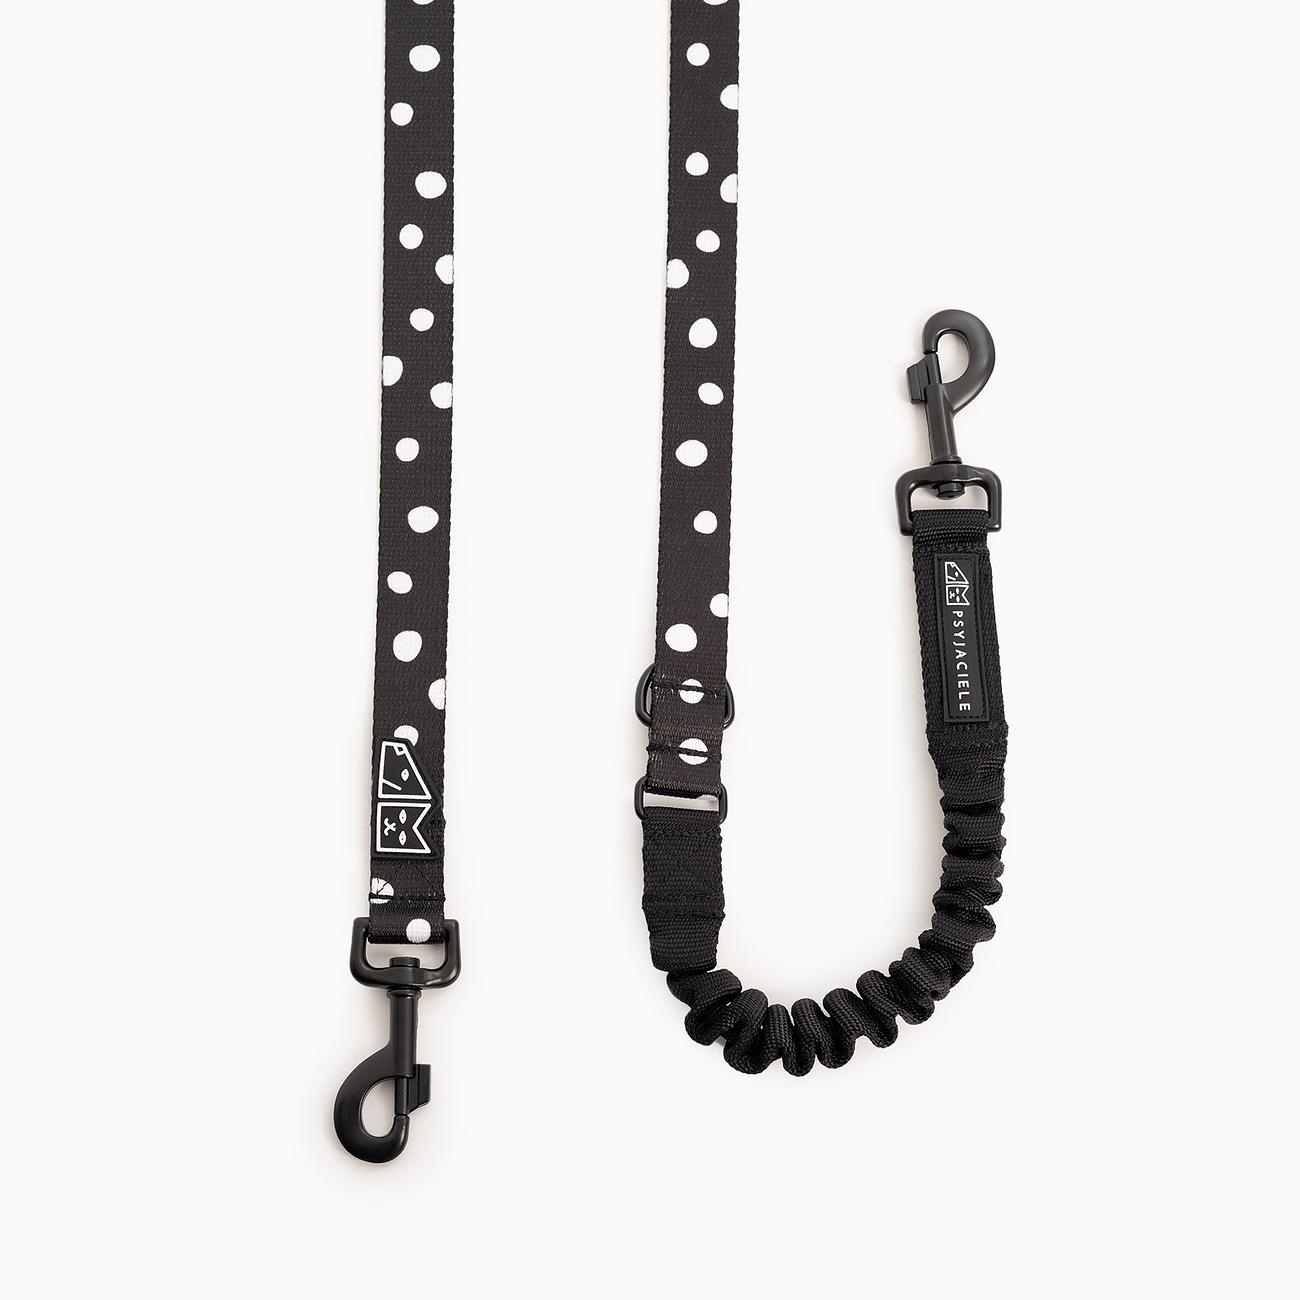 "Adopt the dot" leash with a shock absorber